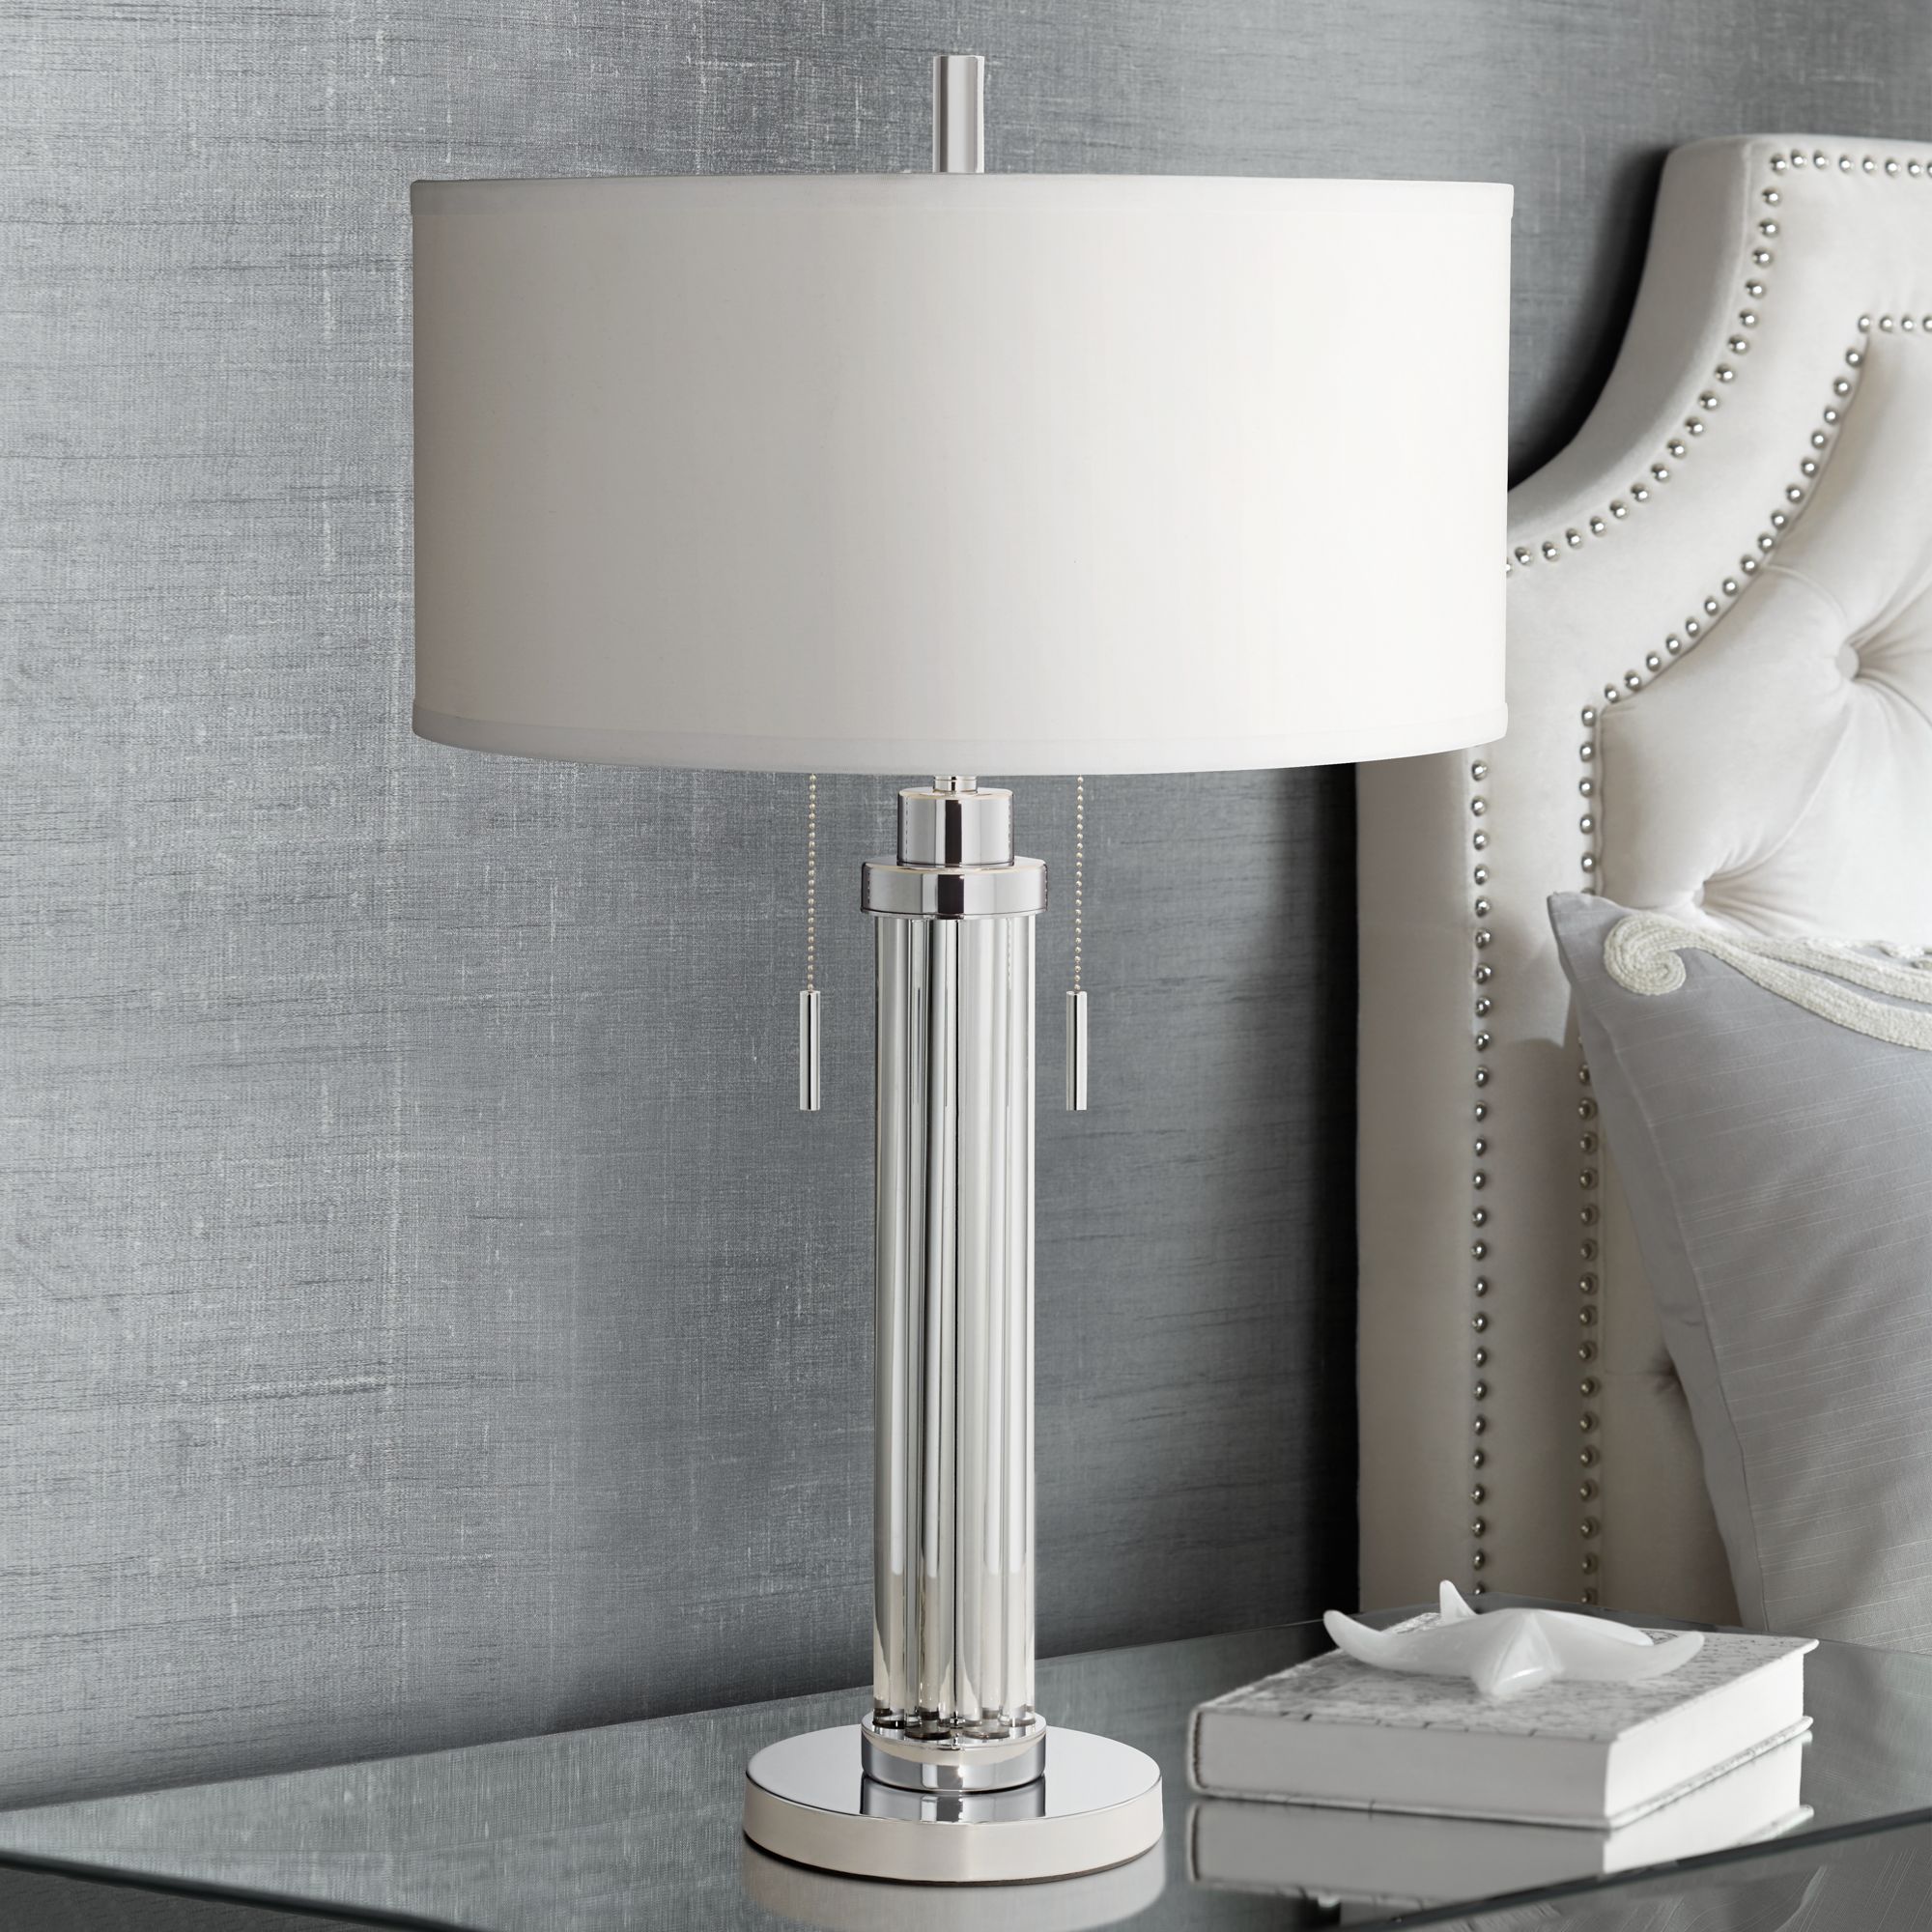 Columbus BlueJackets Plate Rolled in on The lamp Base JS Table Lamp with Chrome Shade 